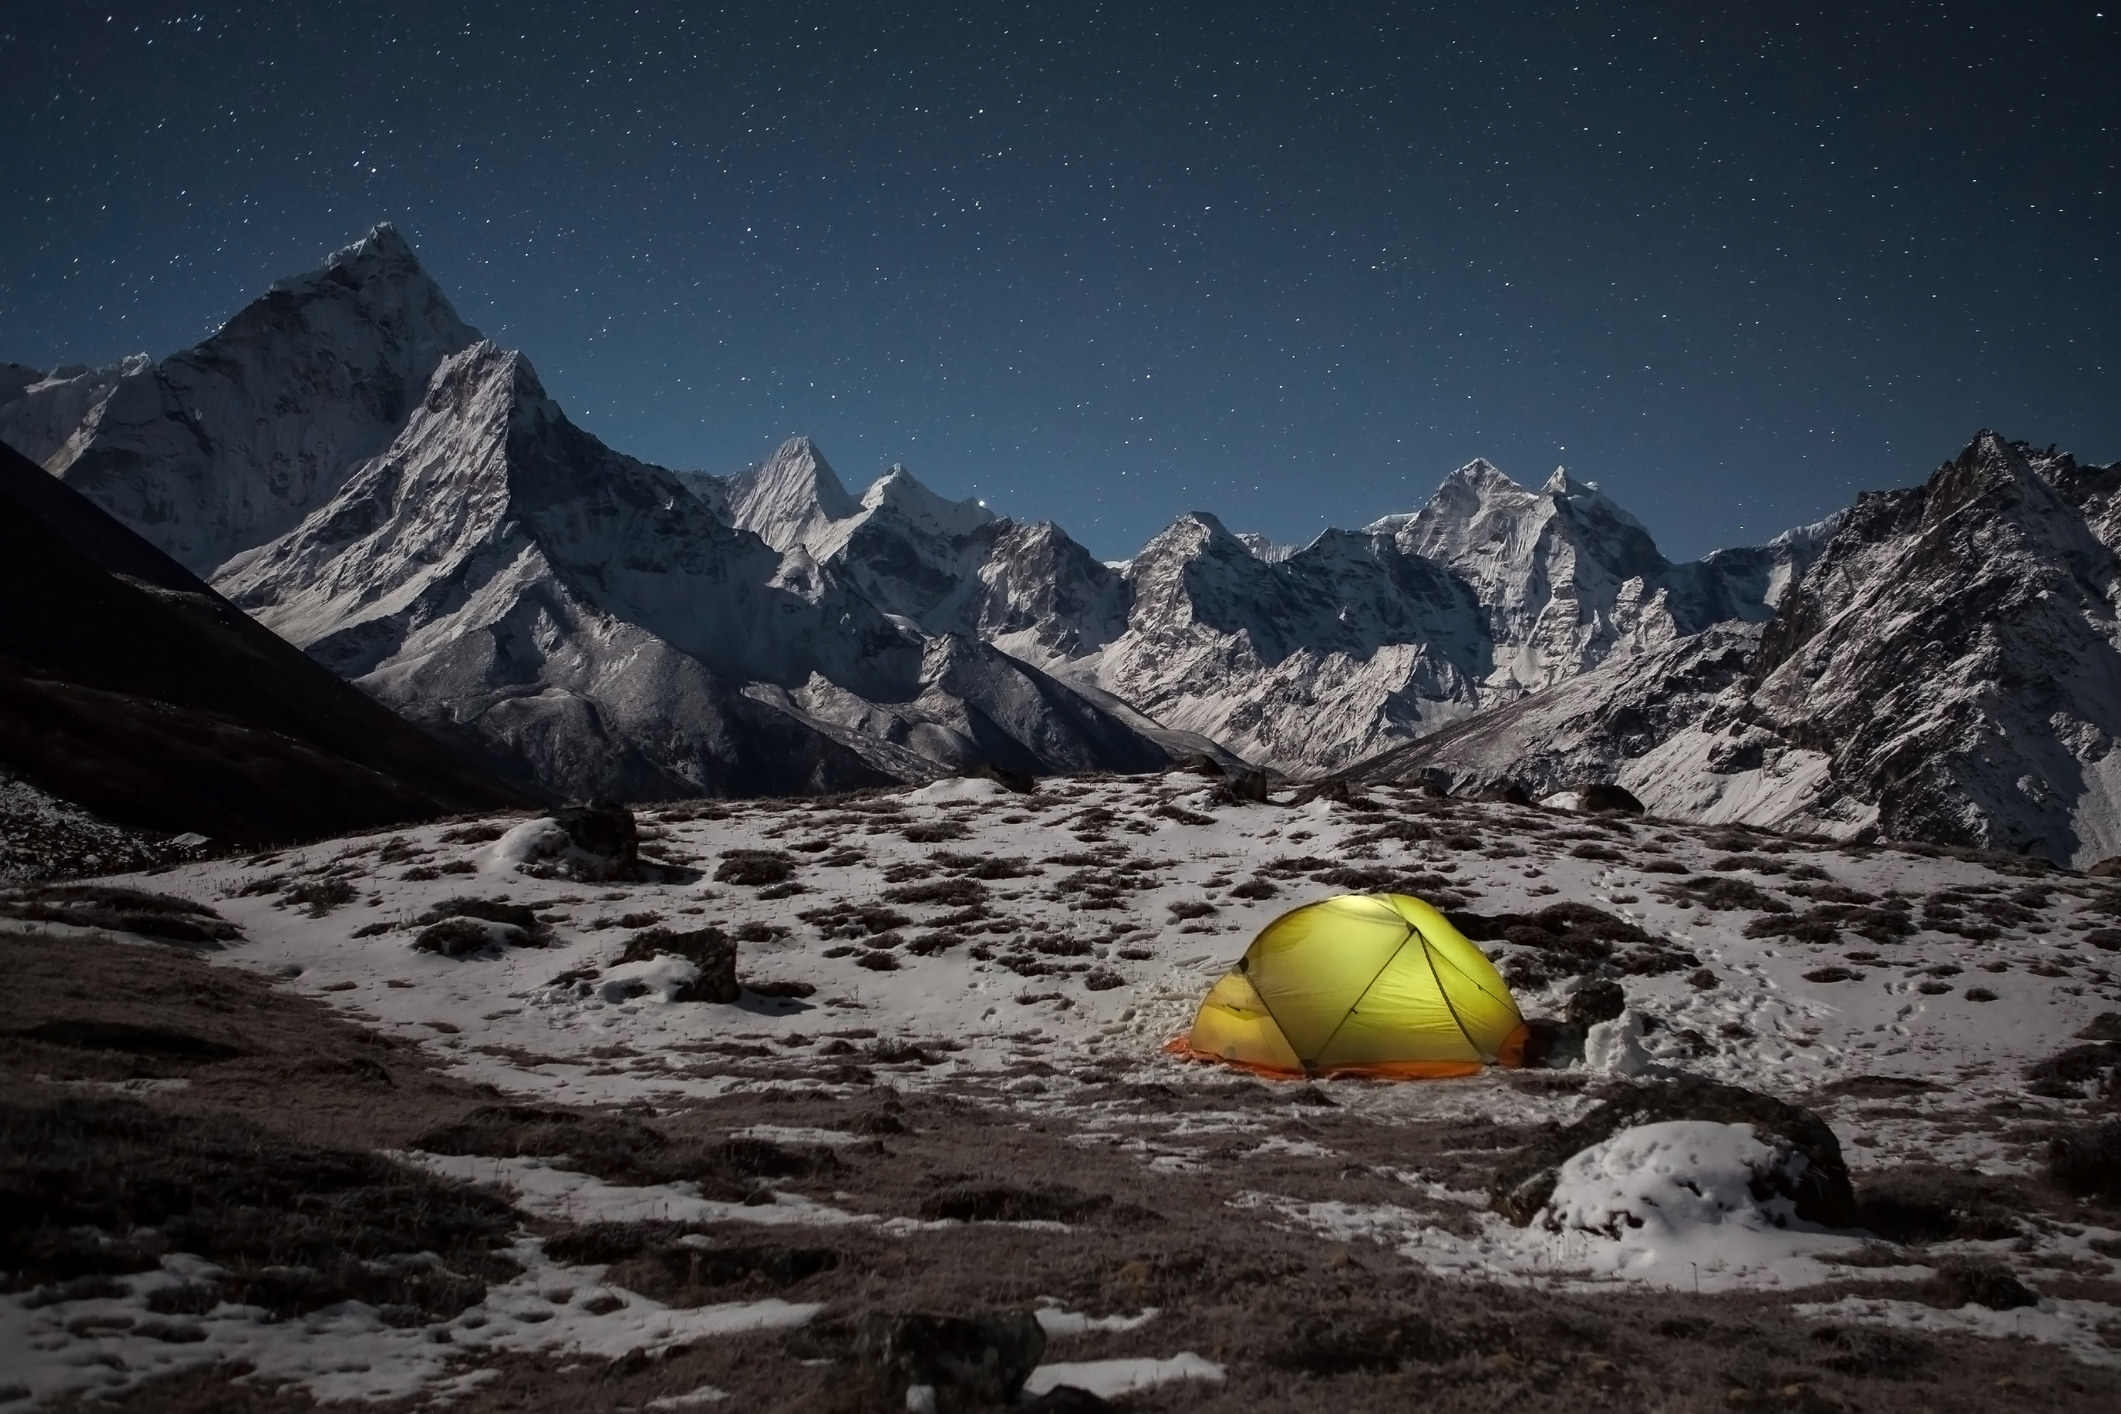 A glowing tent set up under a starry sky, surrounded by snowy mountains